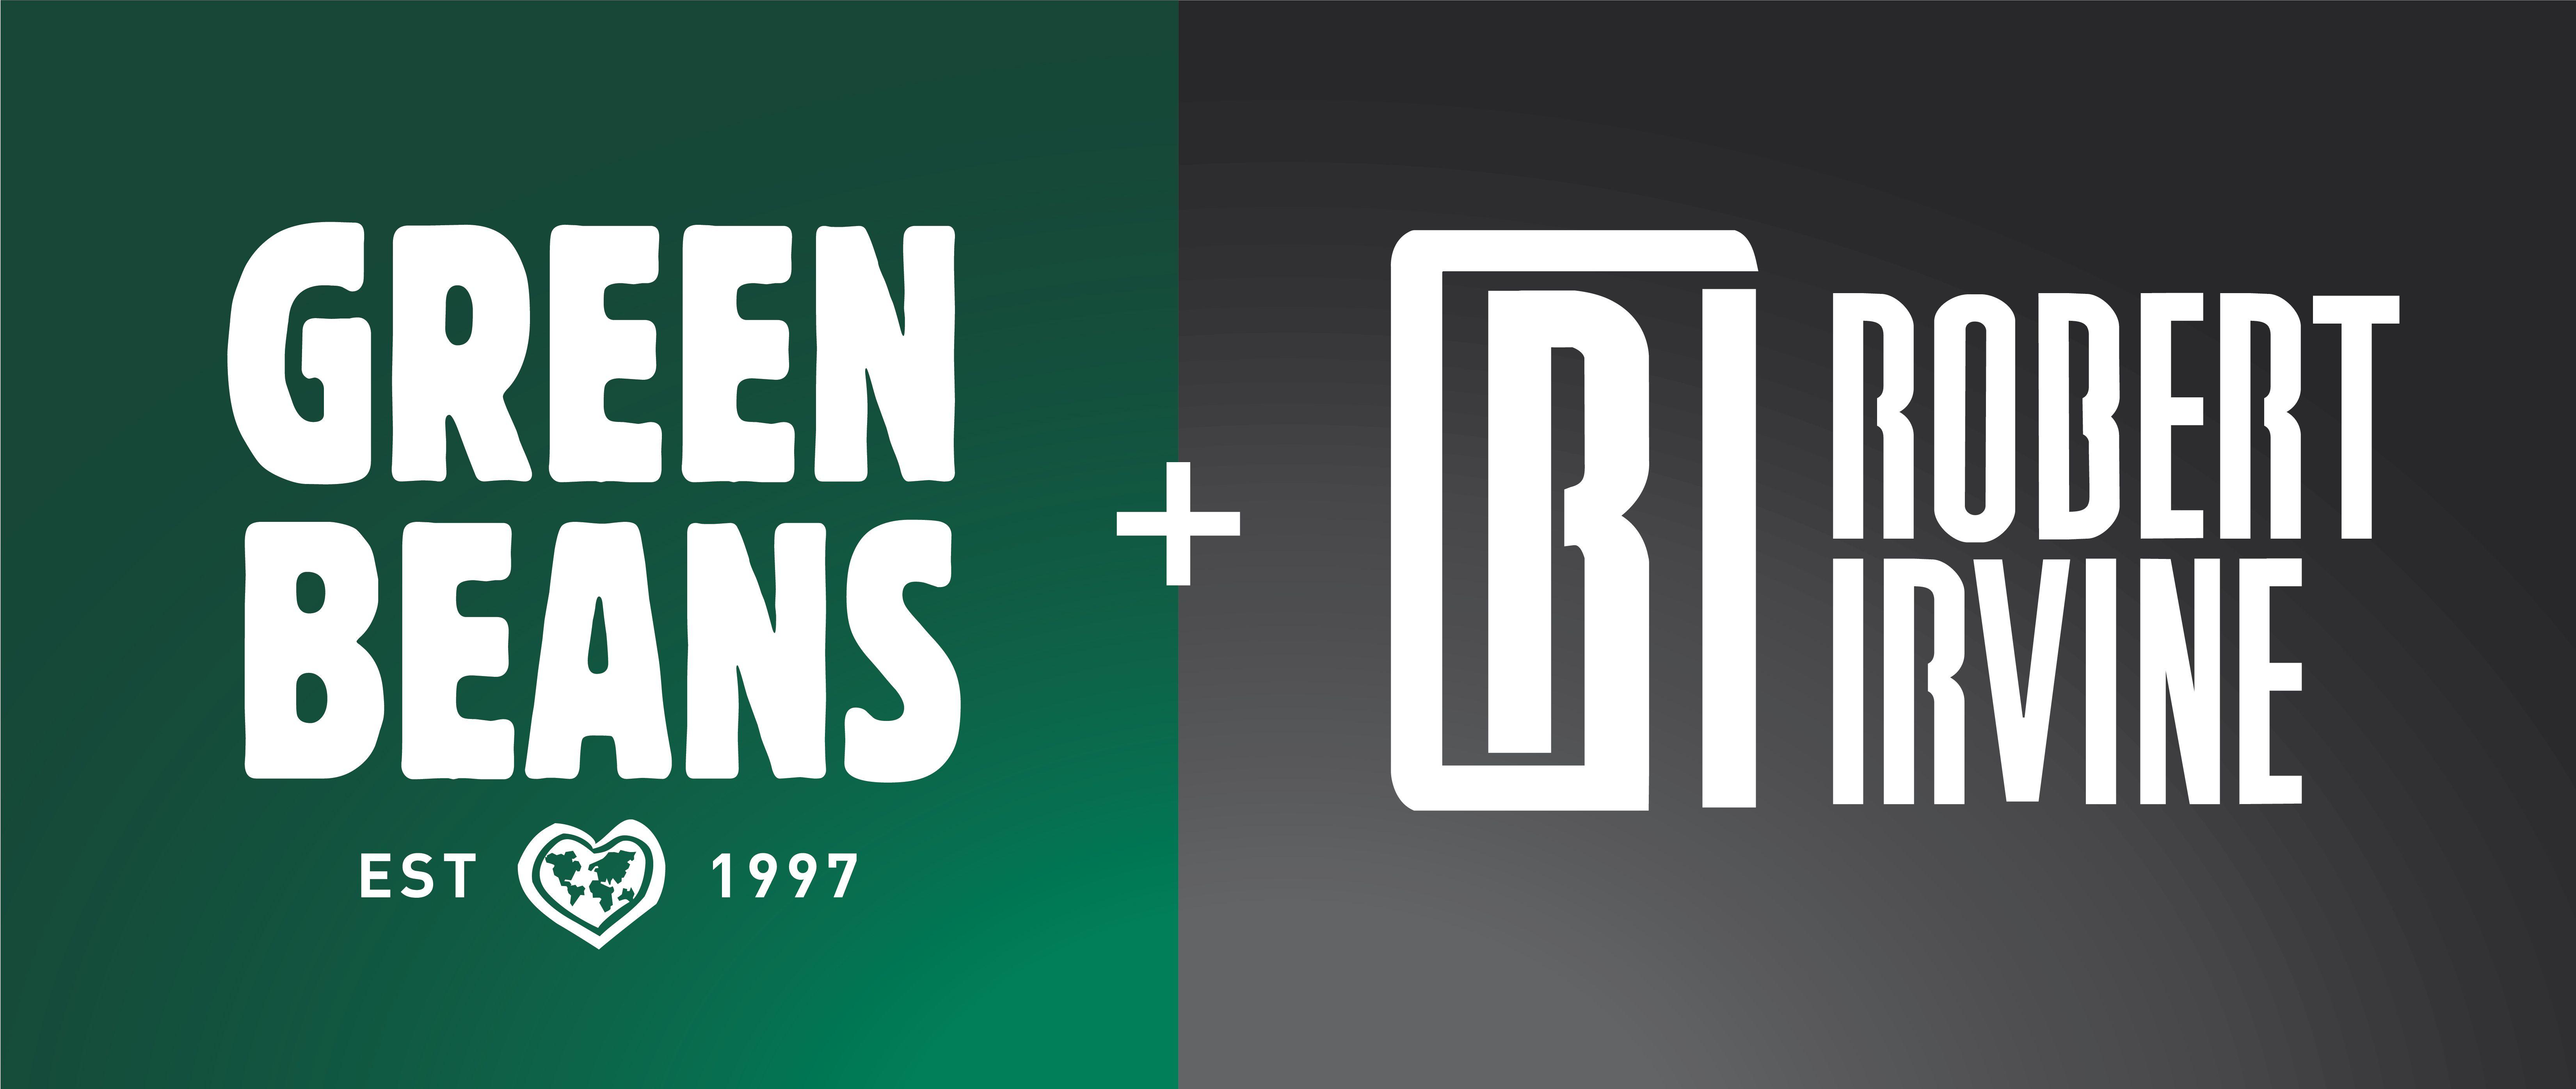 Green Beans Coffee Company Logo - Green Beans Coffee, an Elevate Gourmet Brands company, Announces